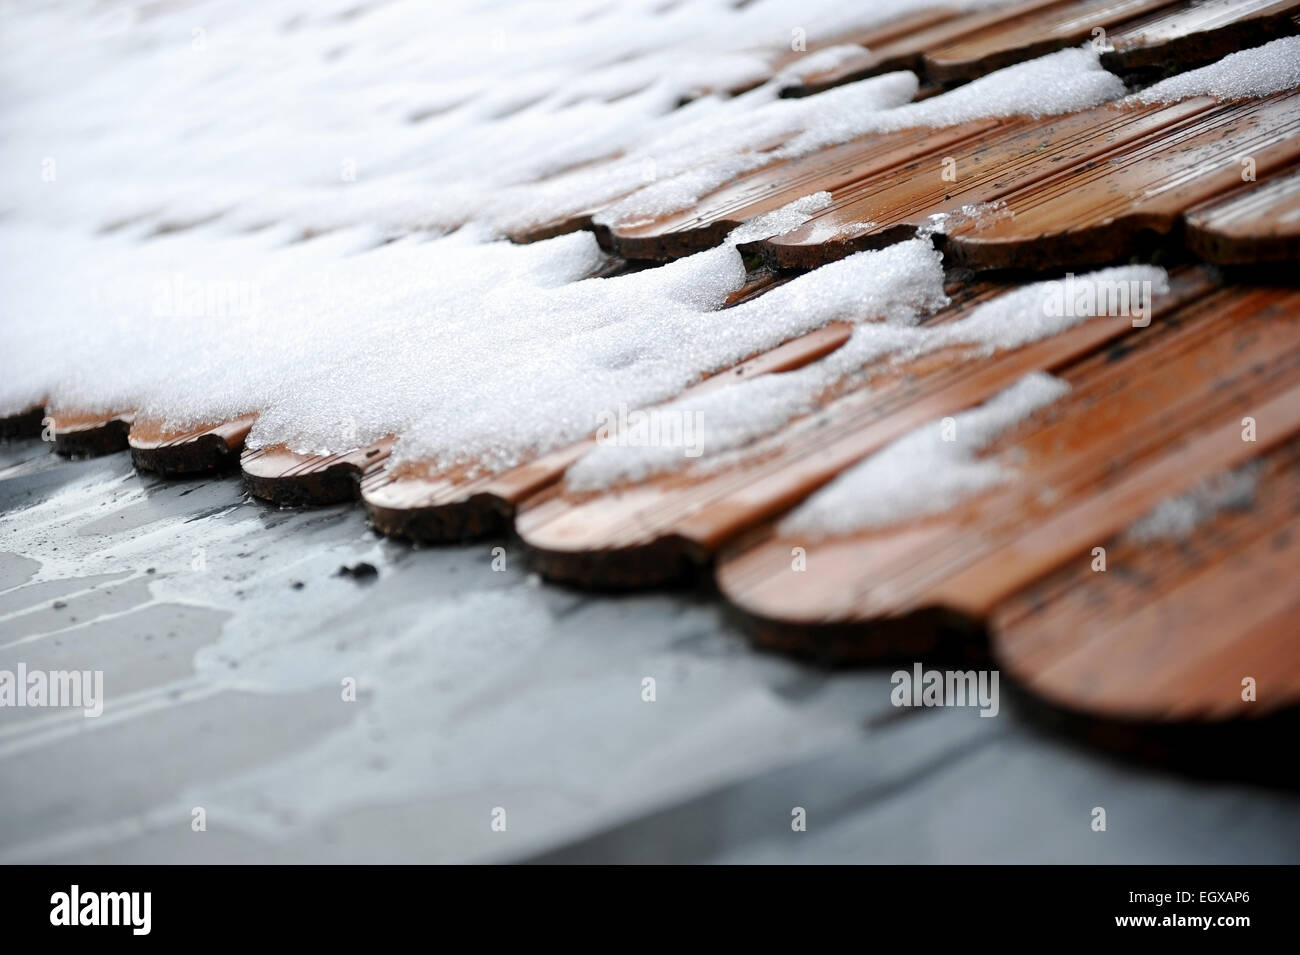 Spring concept shot with snow melting down on a roof tile Stock Photo